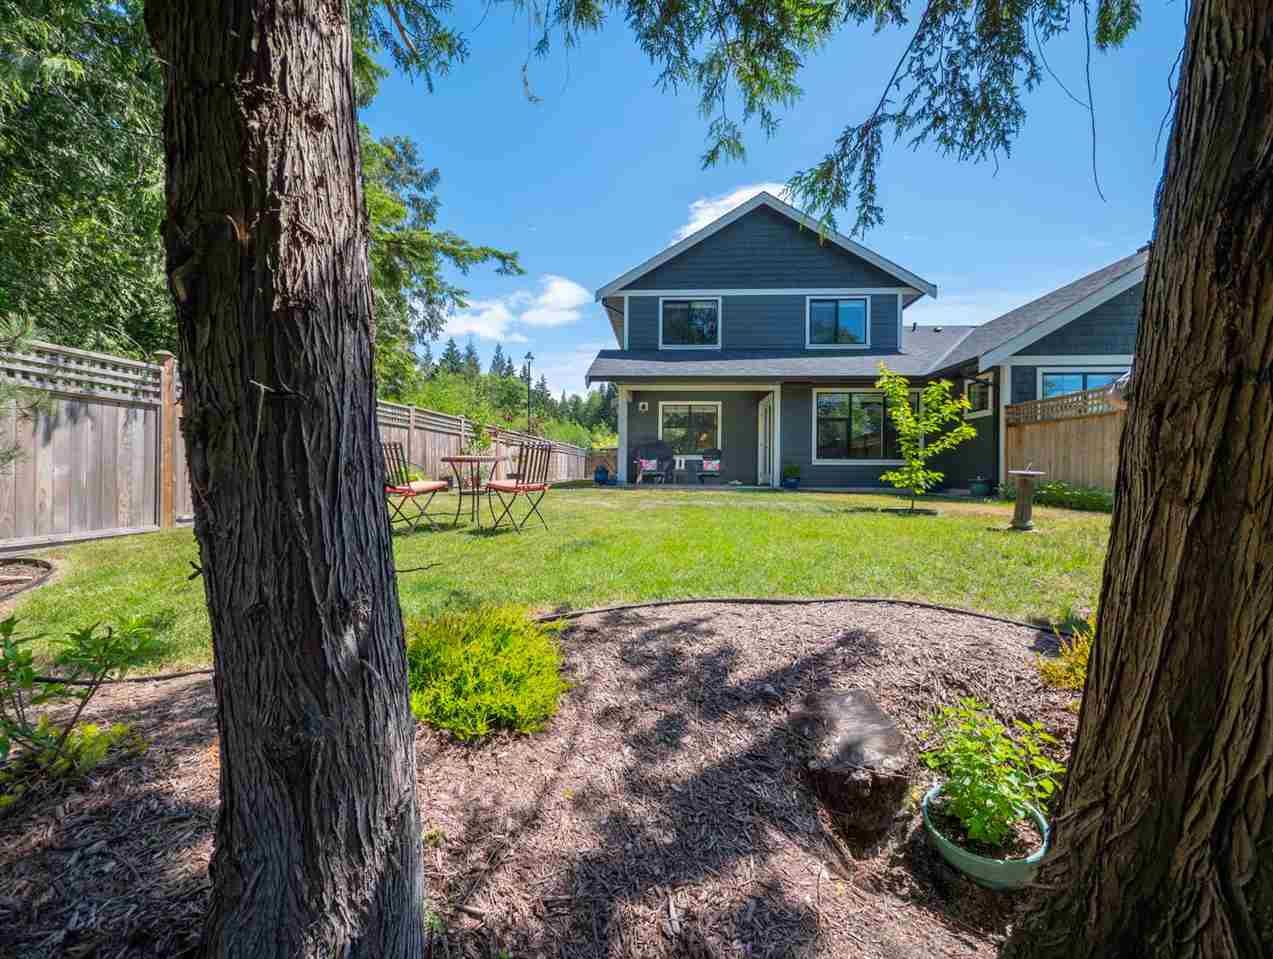 Main Photo: 803 GERUSSI Lane in Gibsons: Gibsons & Area 1/2 Duplex for sale (Sunshine Coast)  : MLS®# R2273897